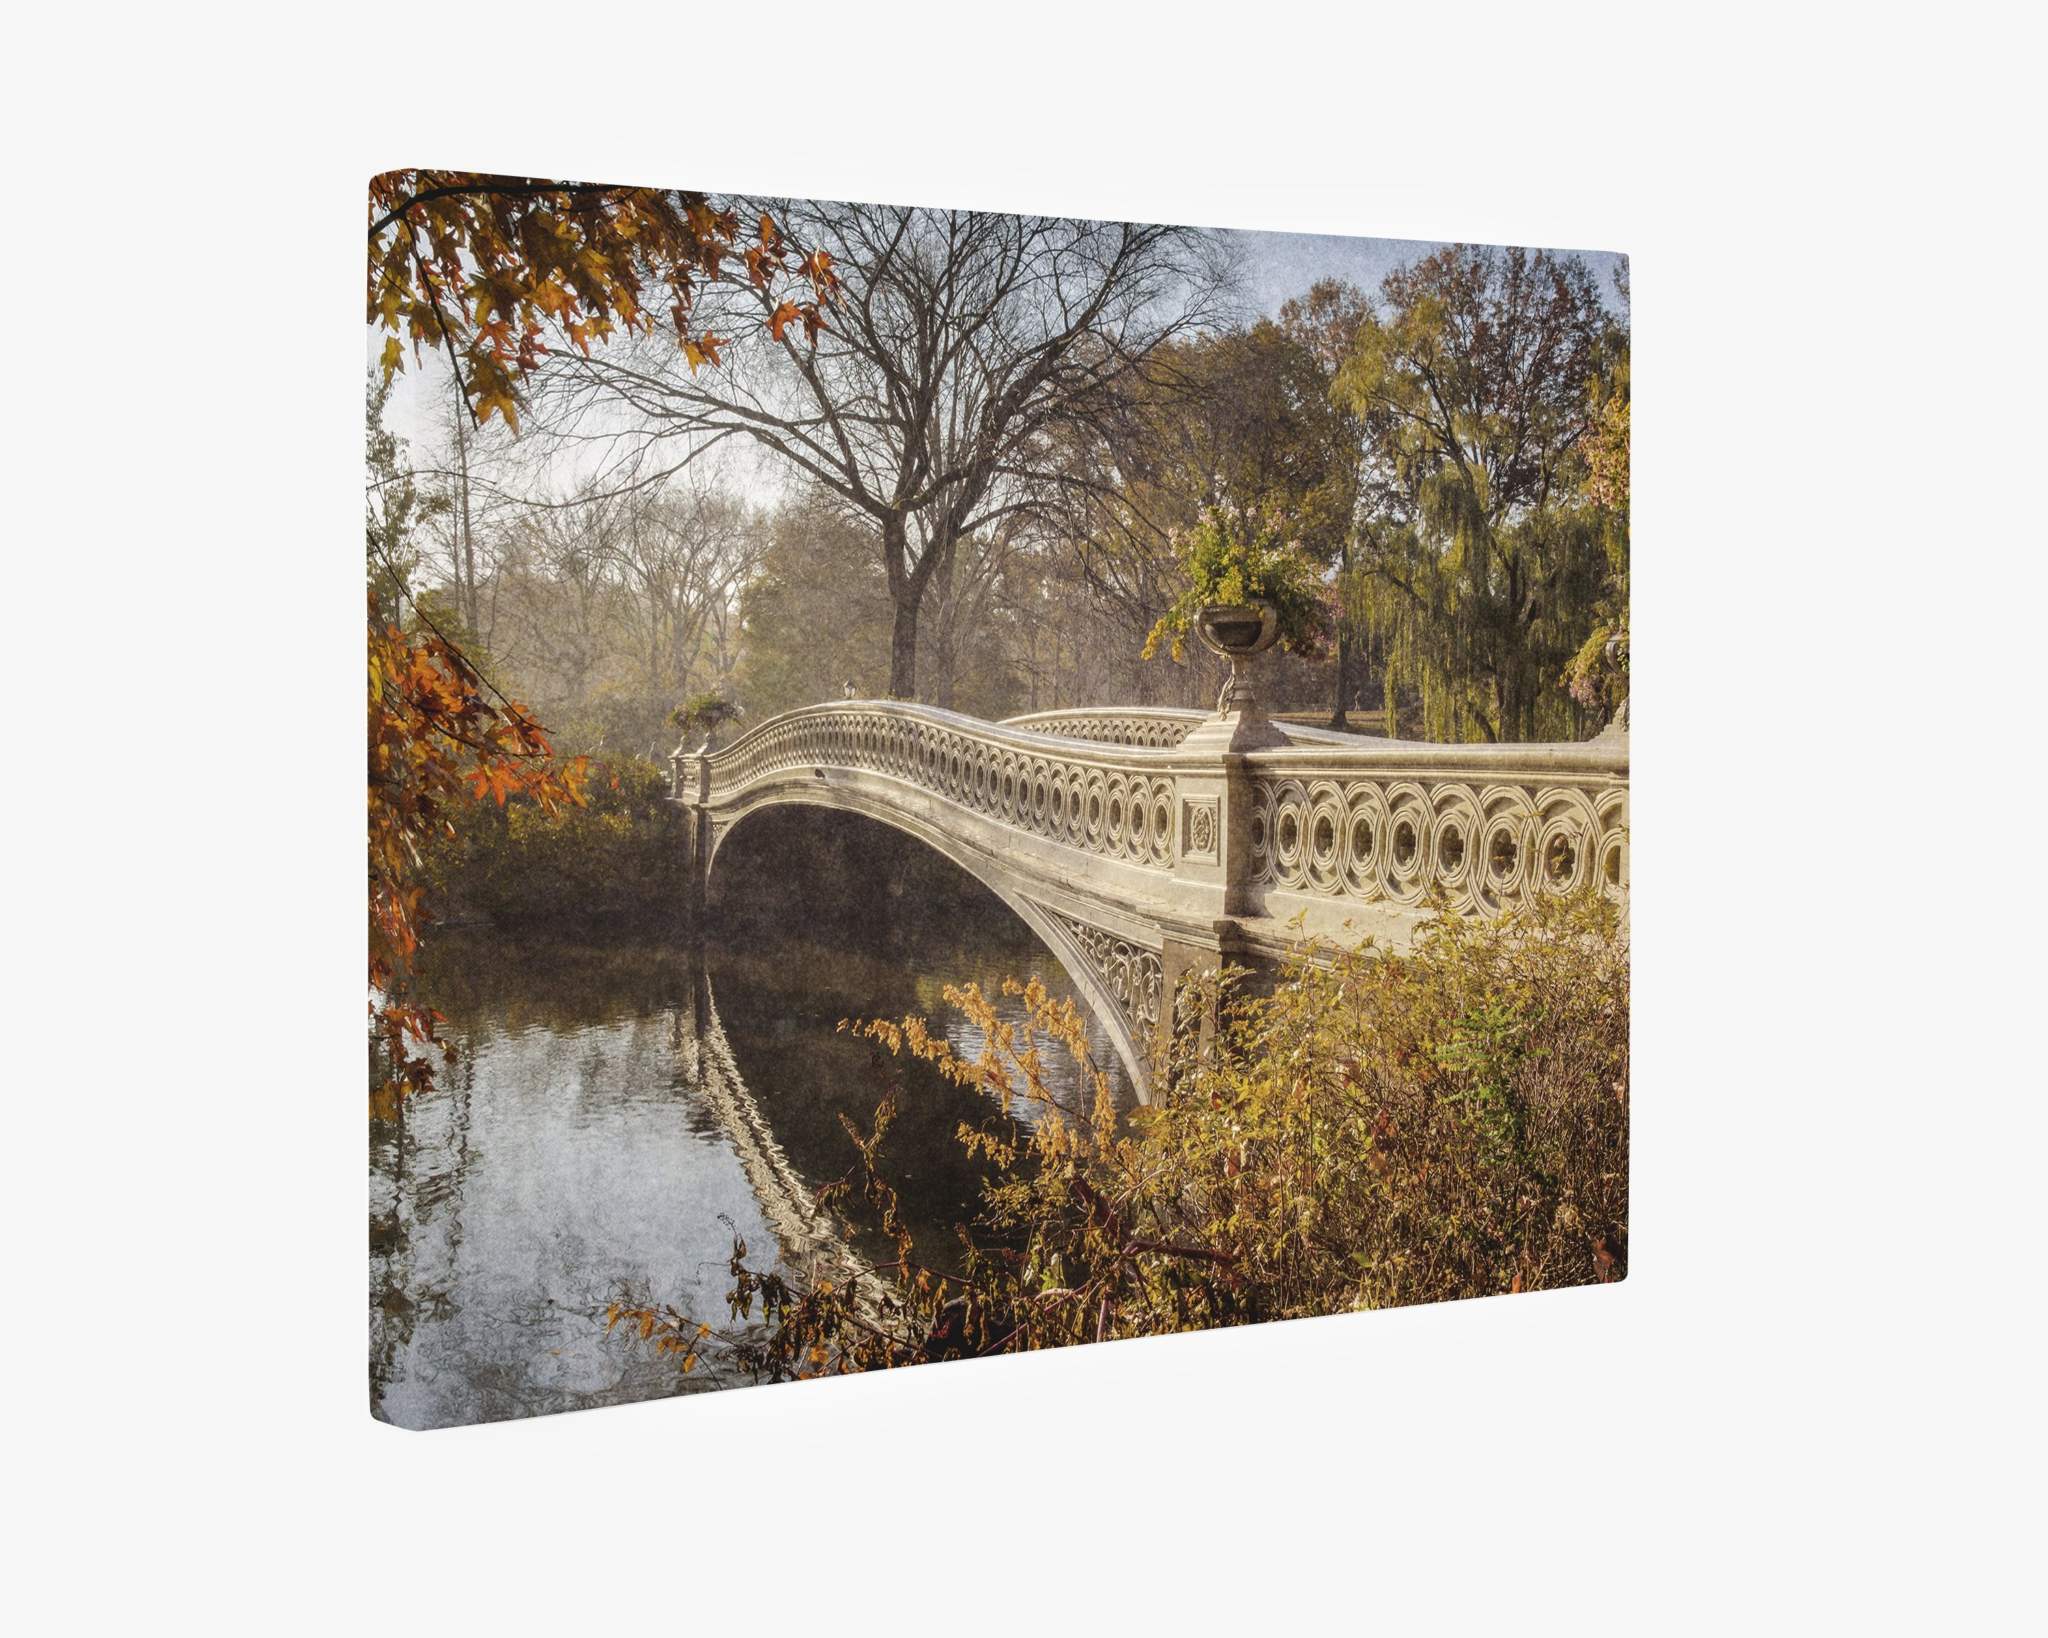 A view of the Bow Bridge in Central Park during autumn showcases the ornate, arched structure adorned with planters, spanning over a calm body of water. Surrounded by colorful fall foliage in shades of orange, yellow, and red with bare trees in the background, it’s perfect for an Offley Green New York City Canvas Wall Art, &#39;Fall Bow Bridge.&#39;